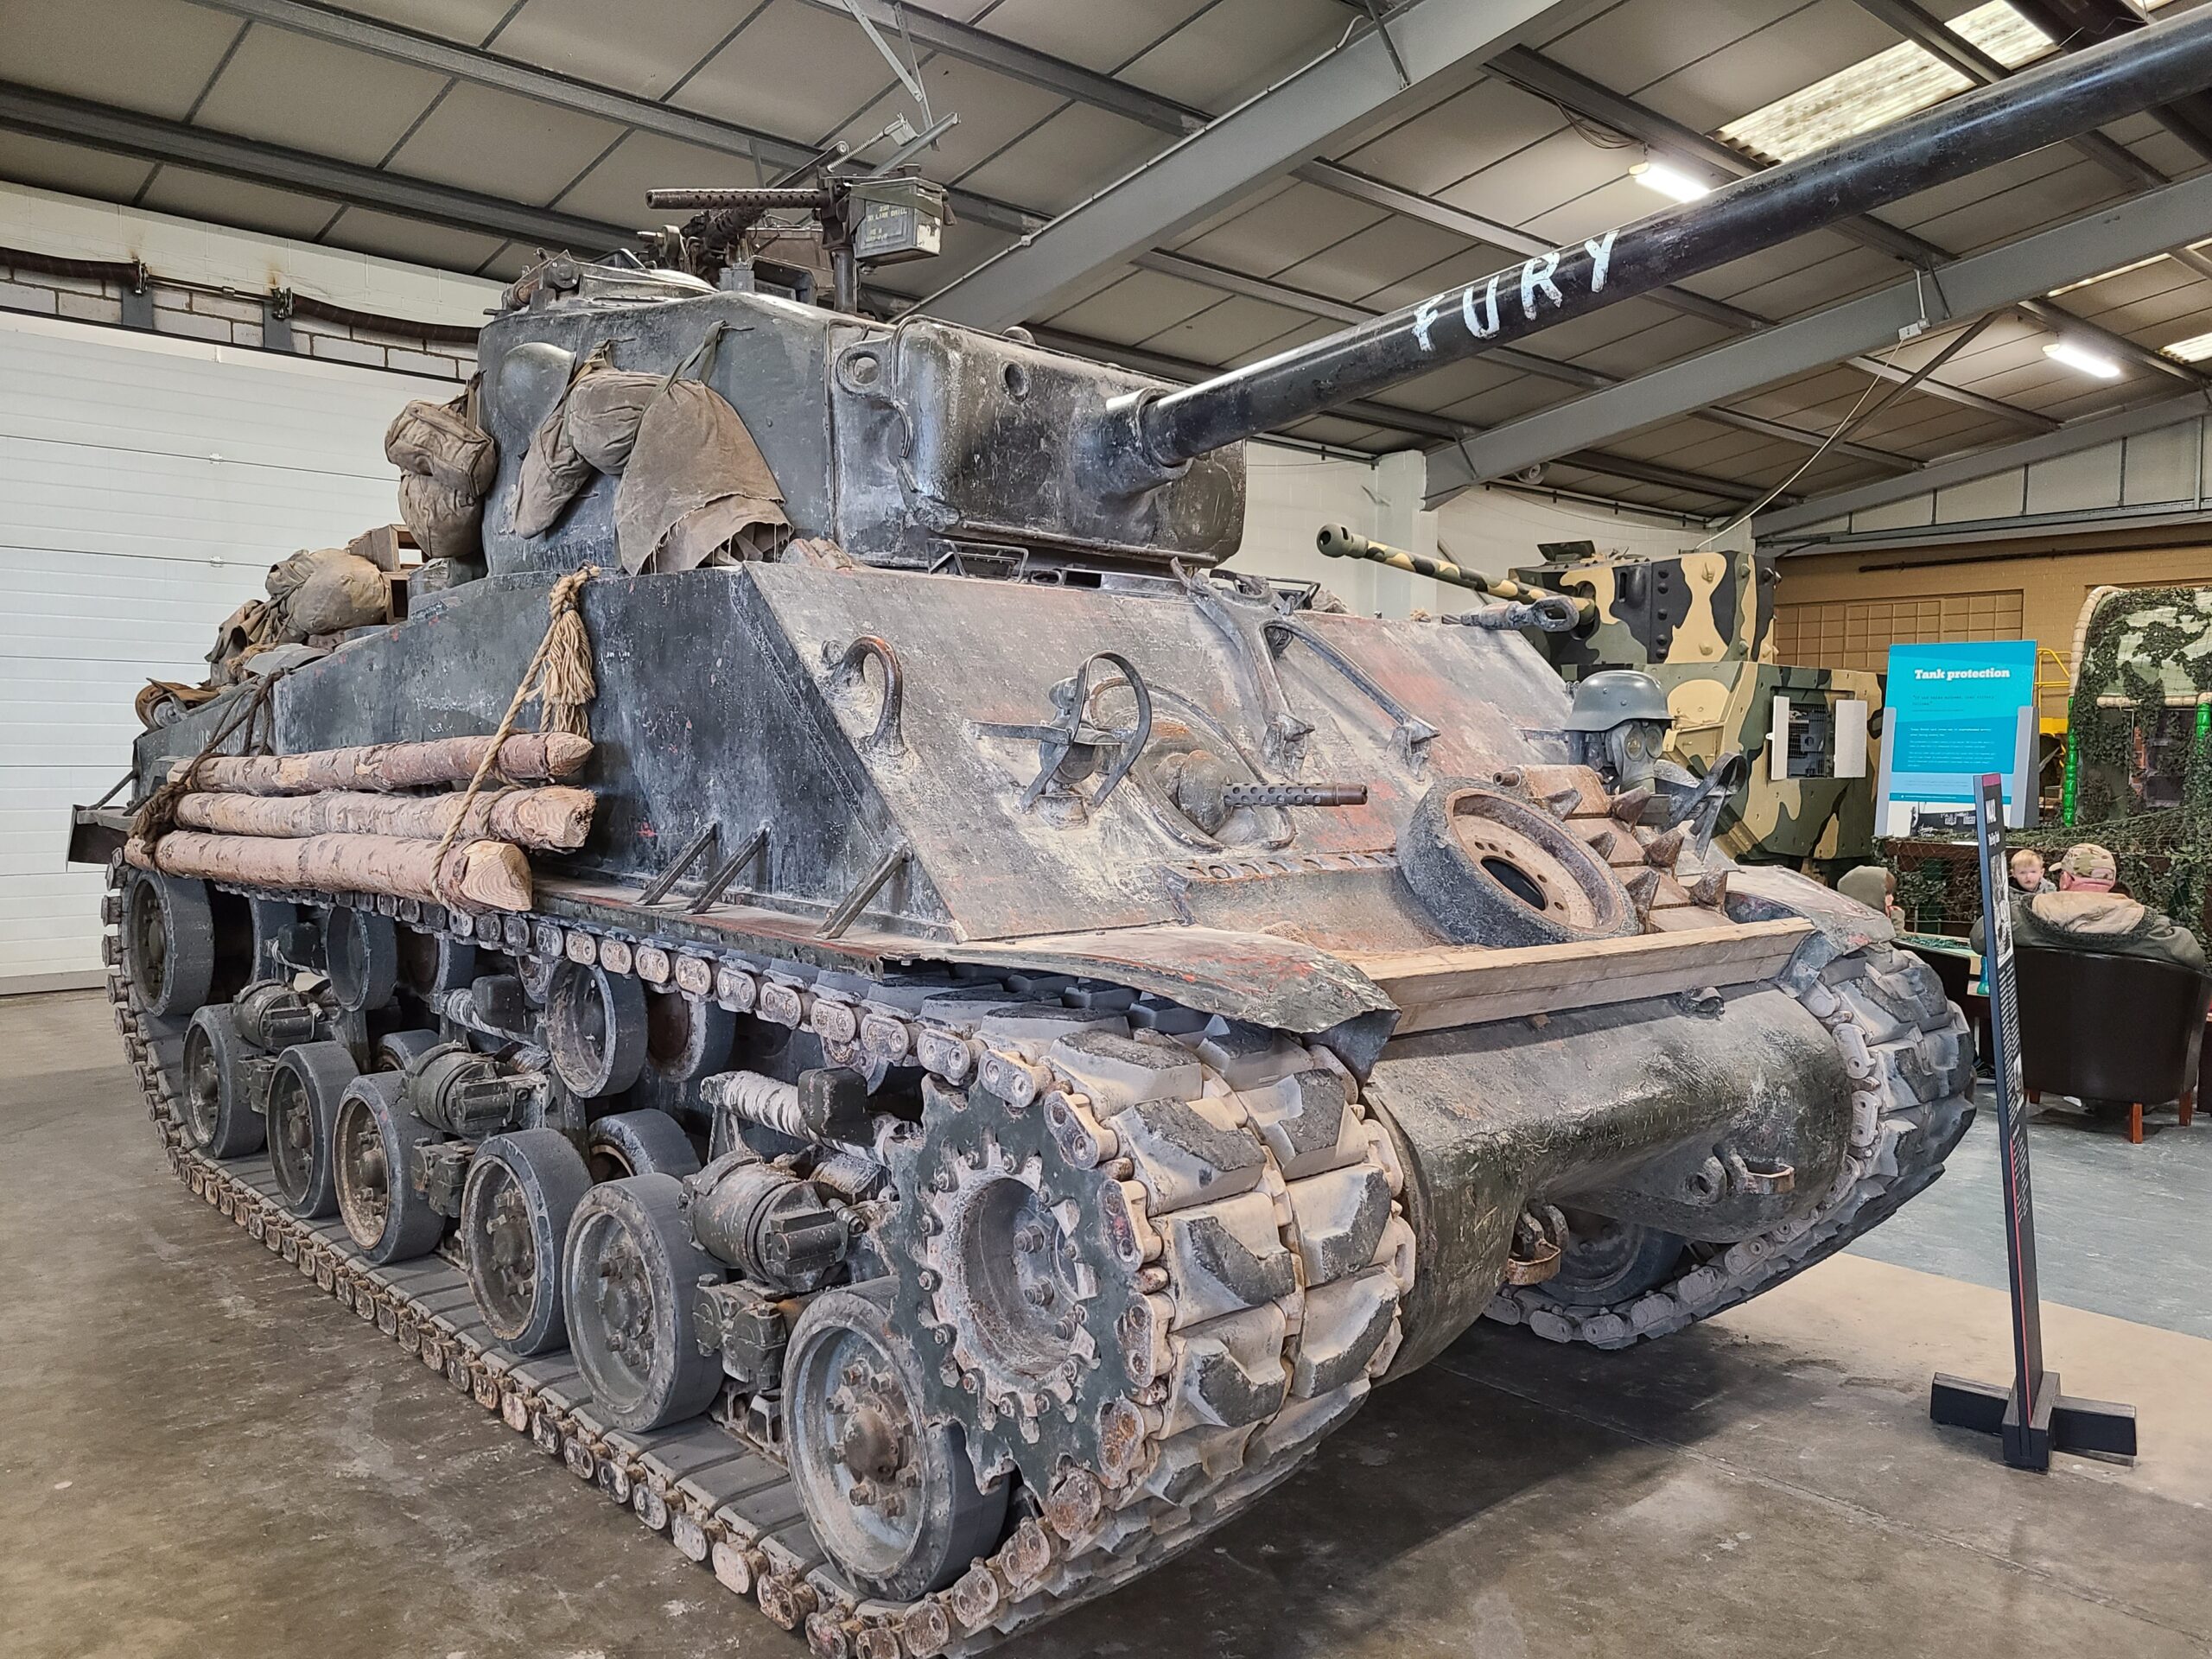 Sherman M42E8 featured in the film Fury at the Tank Museum near our Dorset B&B